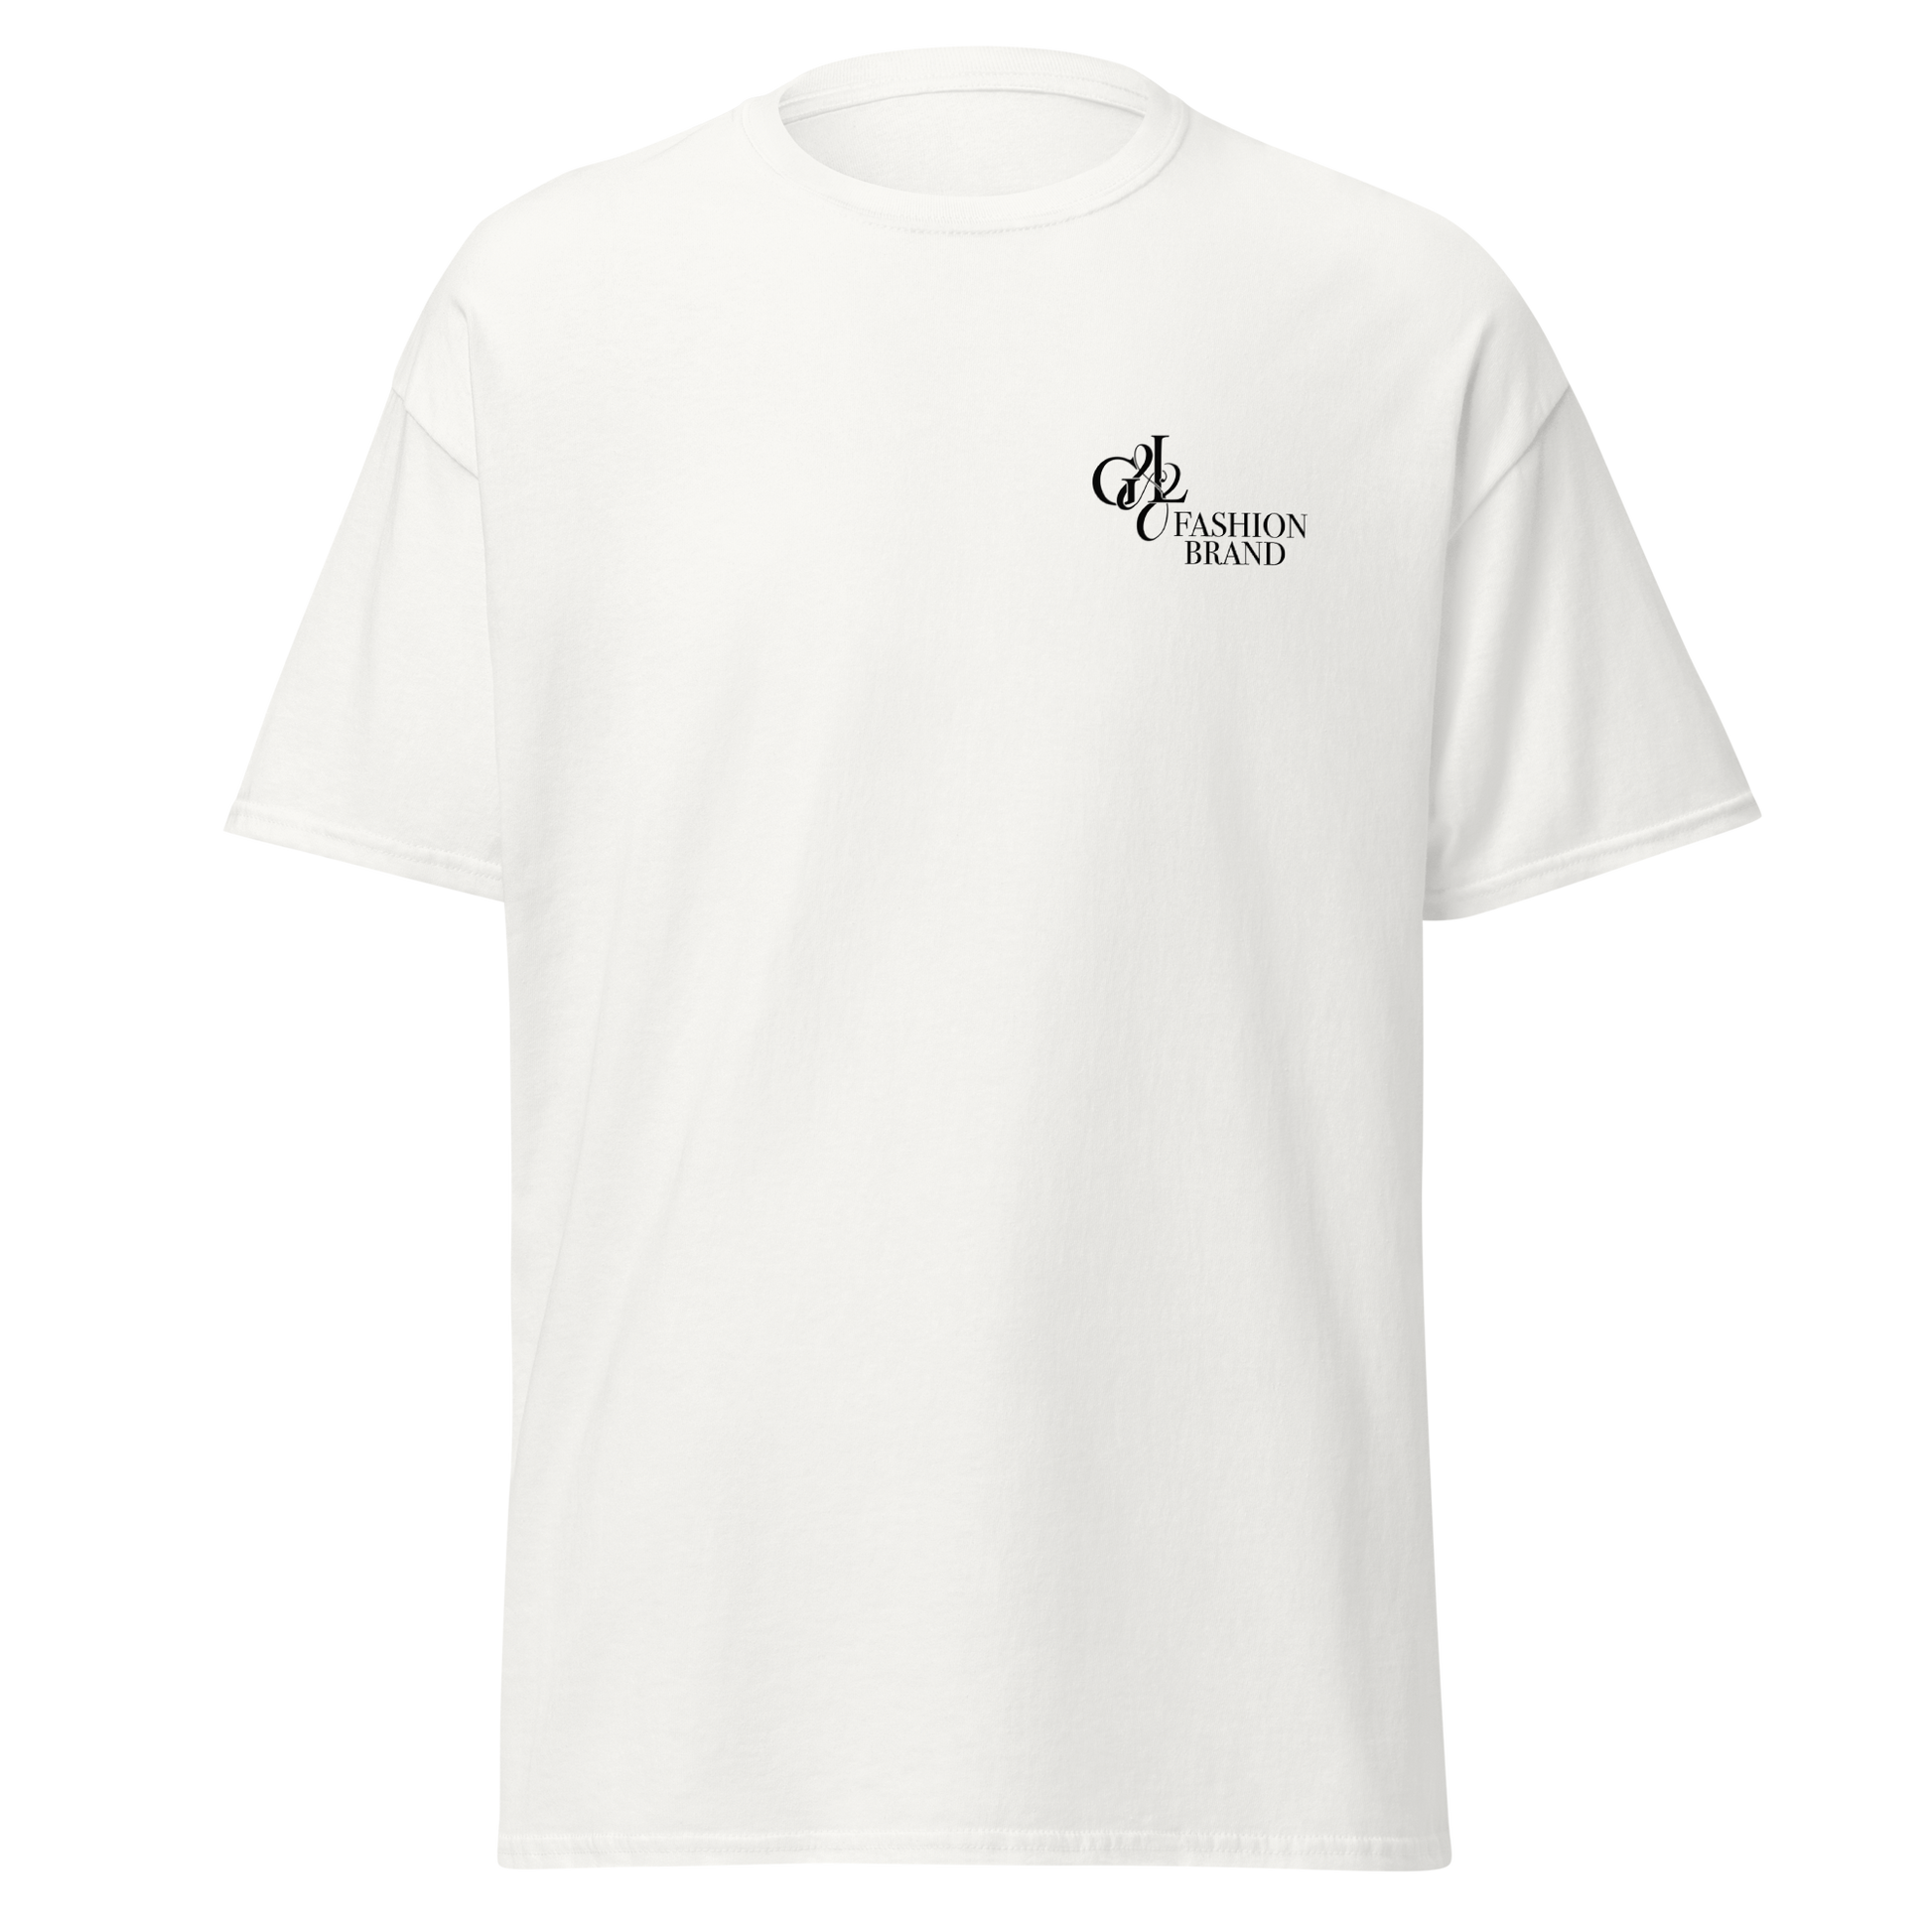 Experience premium quality with G&L Fashion Brand’s white DTG T-shirt. Featuring vibrant direct-to-garment printing, this stylish and comfortable piece is perfect for any casual occasion. Elevate your wardrobe with G&L Fashion Brand.